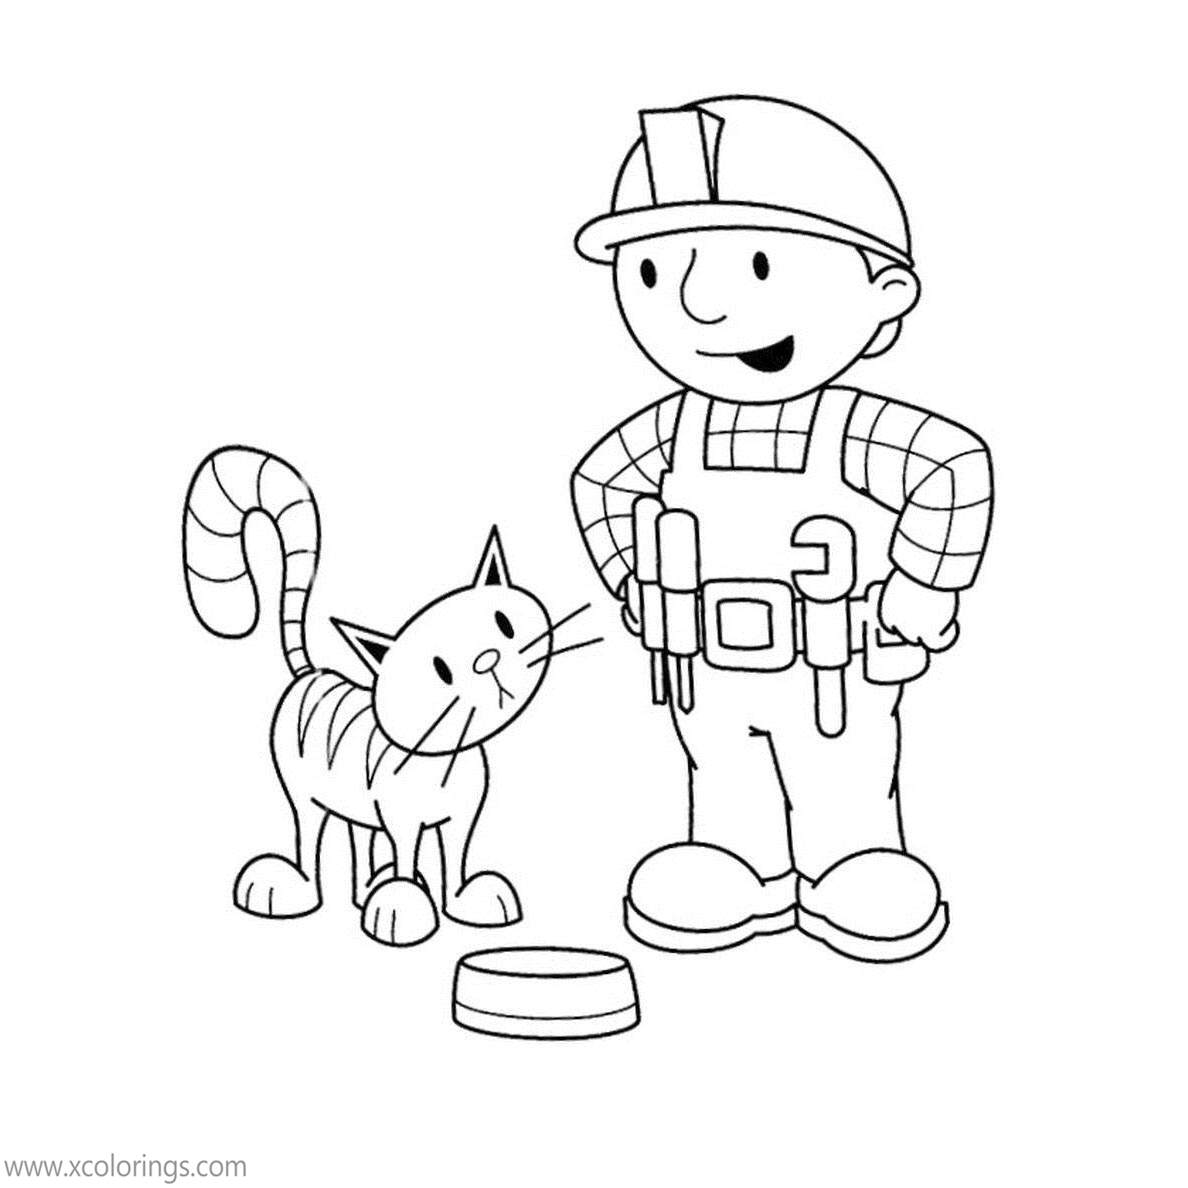 Free Bob the Builder Coloring Pages Pilchard is Hungry printable